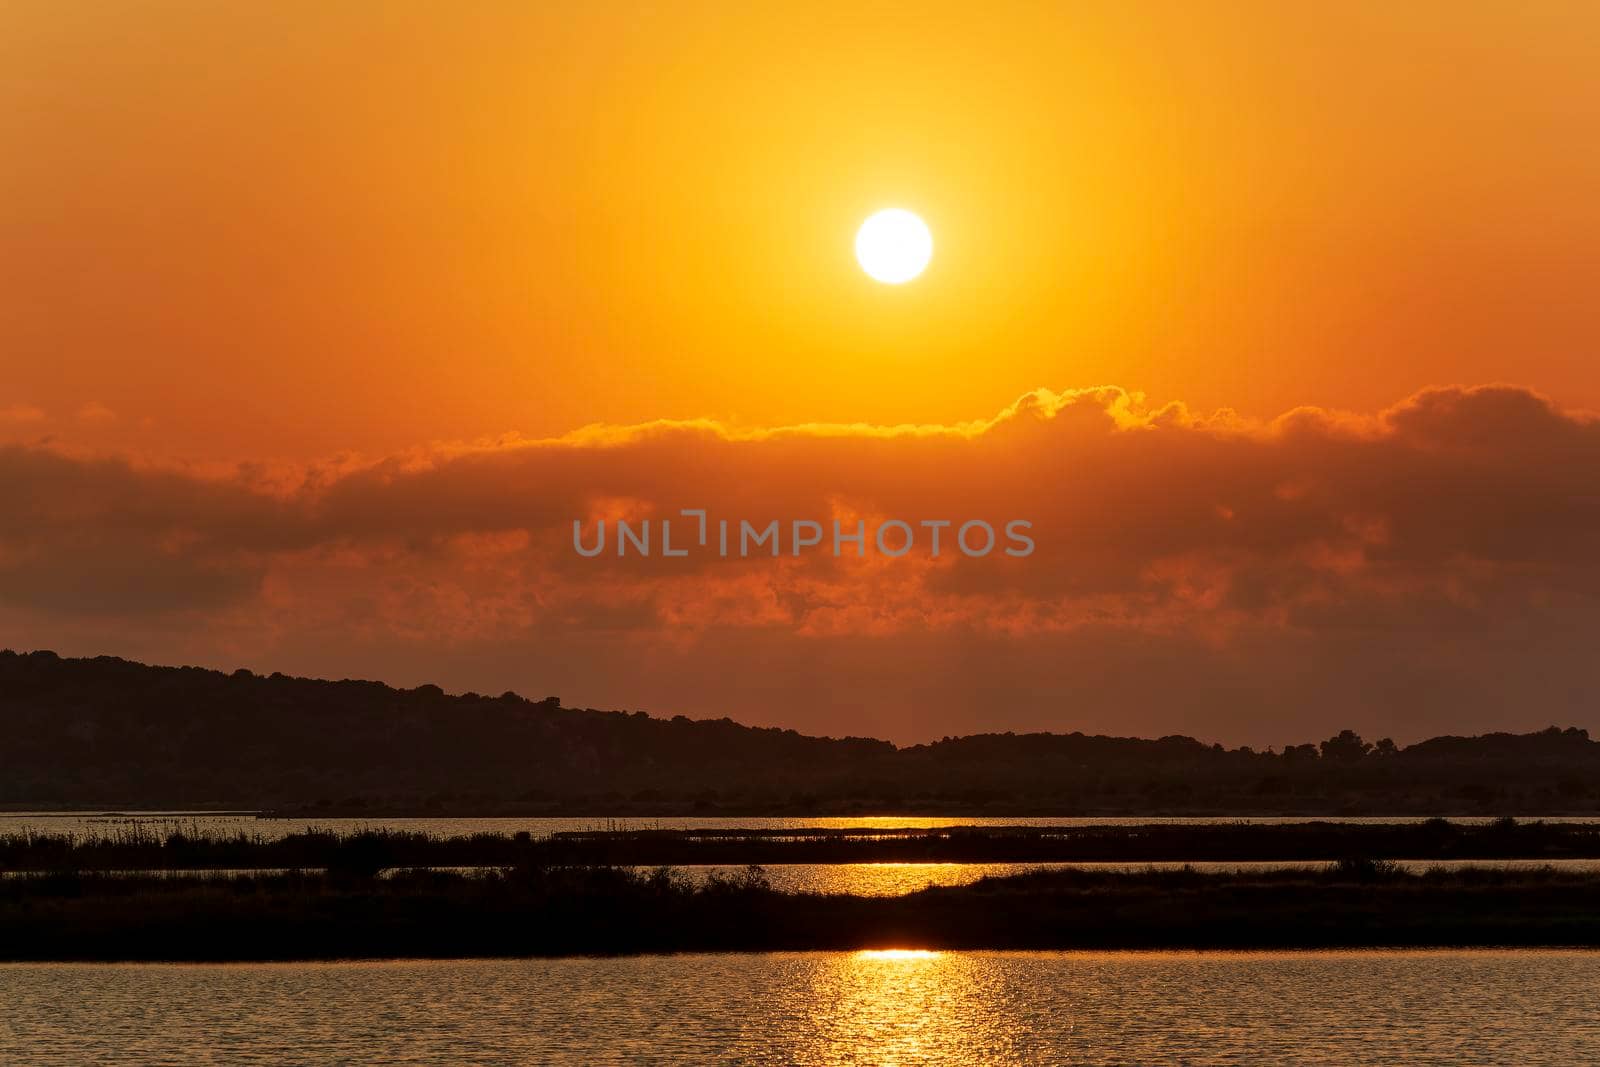 Sunset at the gialova lagoon. The gialova lagoon is one of the most important wetlands in Europe, as it constitutes the southernmost migratory station of migratory birds in the Balkans to and from Africa.